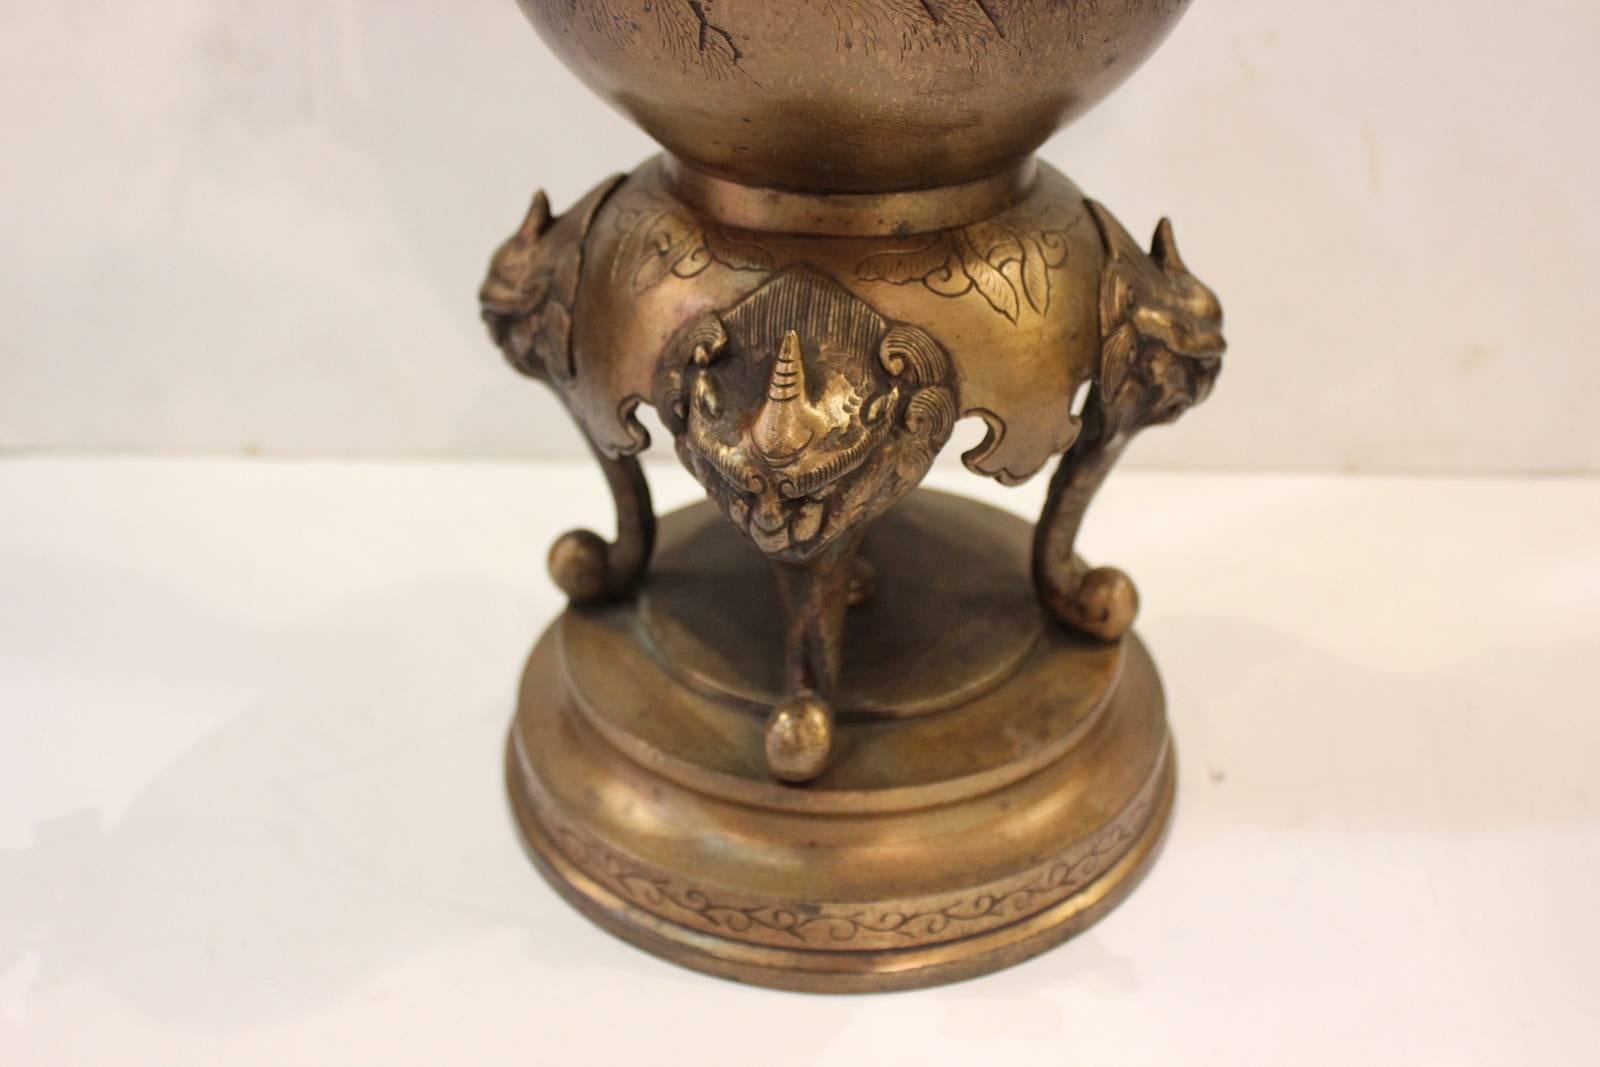 A pair of Japanese bronze finish Aesthetic Movement covered censors. The highly detailed bodes with birds and branches resting on a beautifully detailed base. The lids have an elaborate cast bird sculpture finial with subtle pierced areas. The